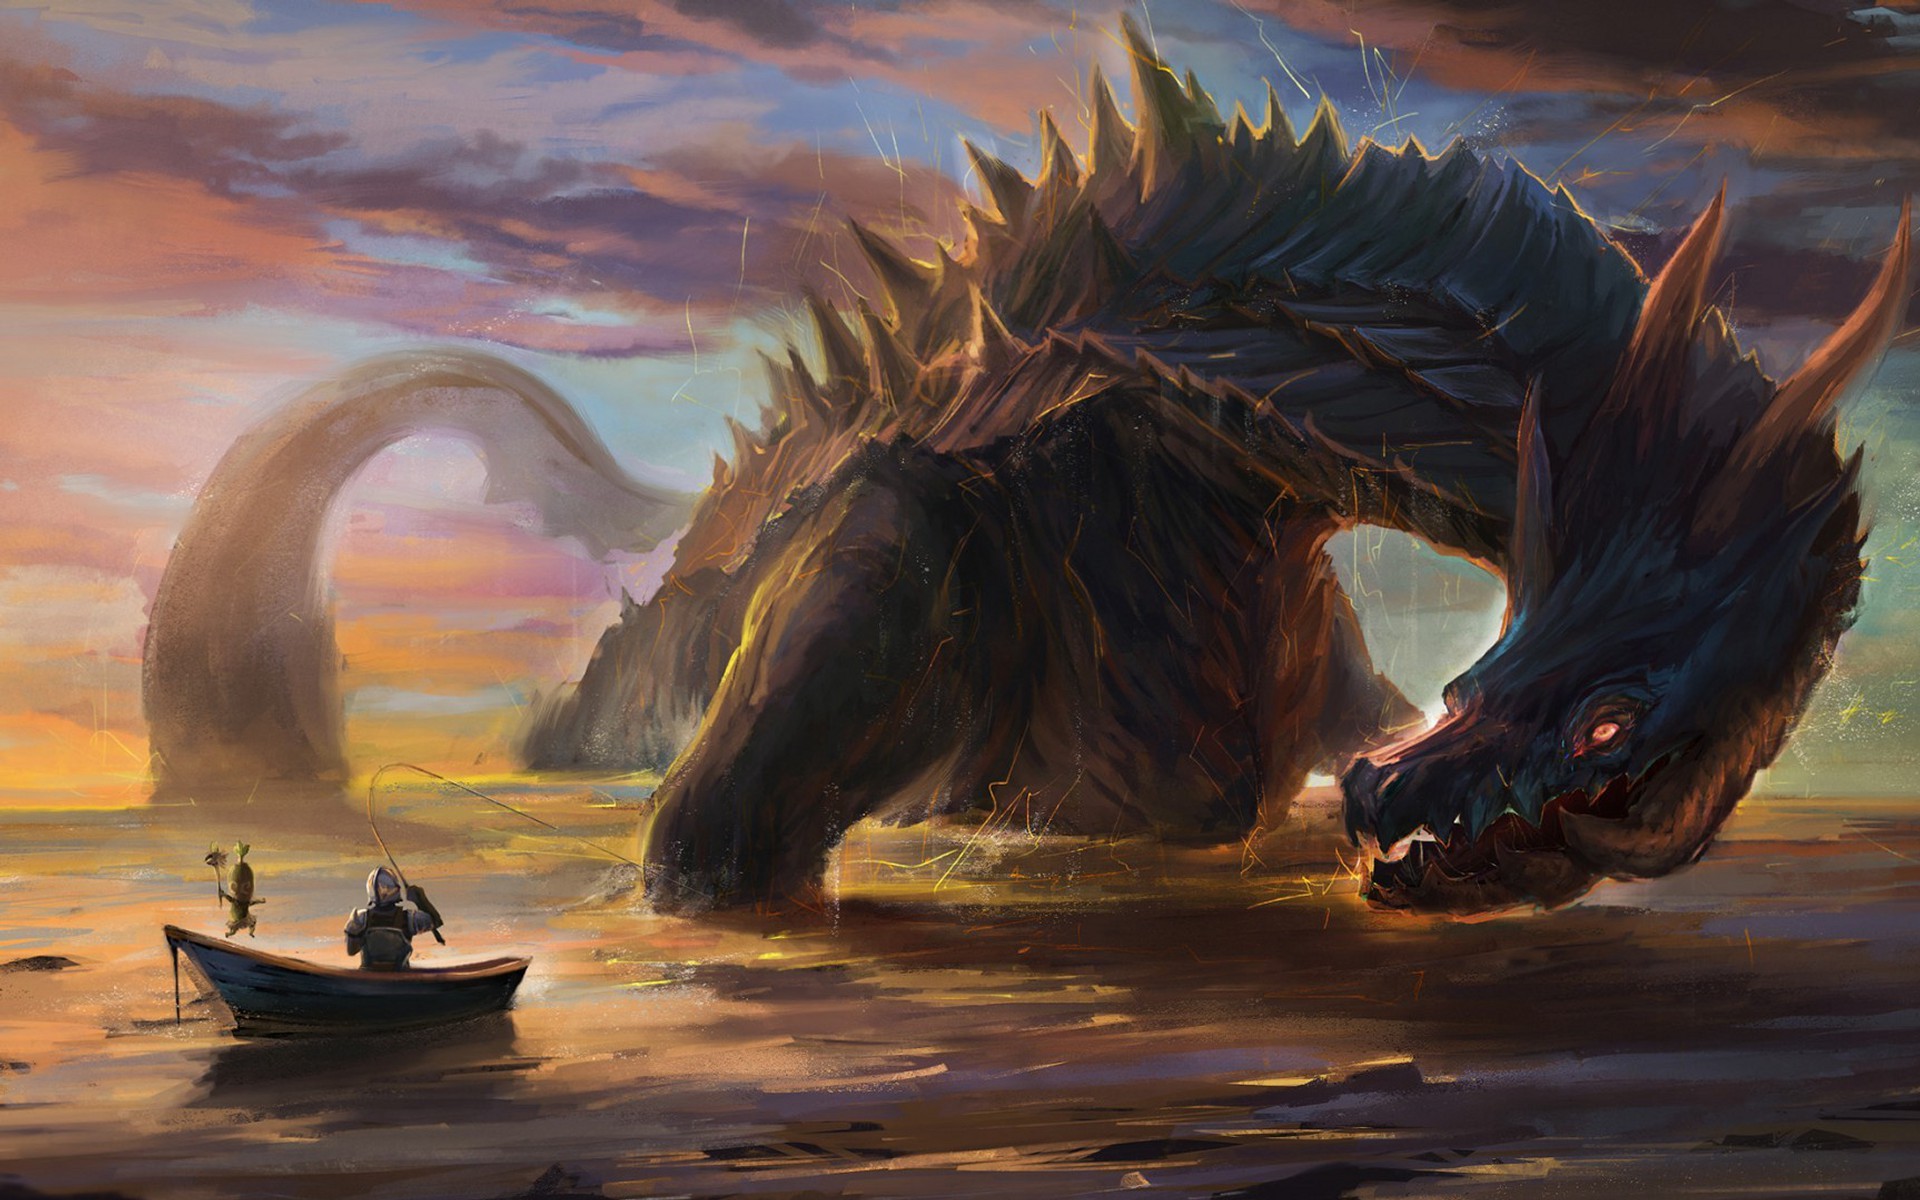 Extra Wallpapers - Giant sea monster